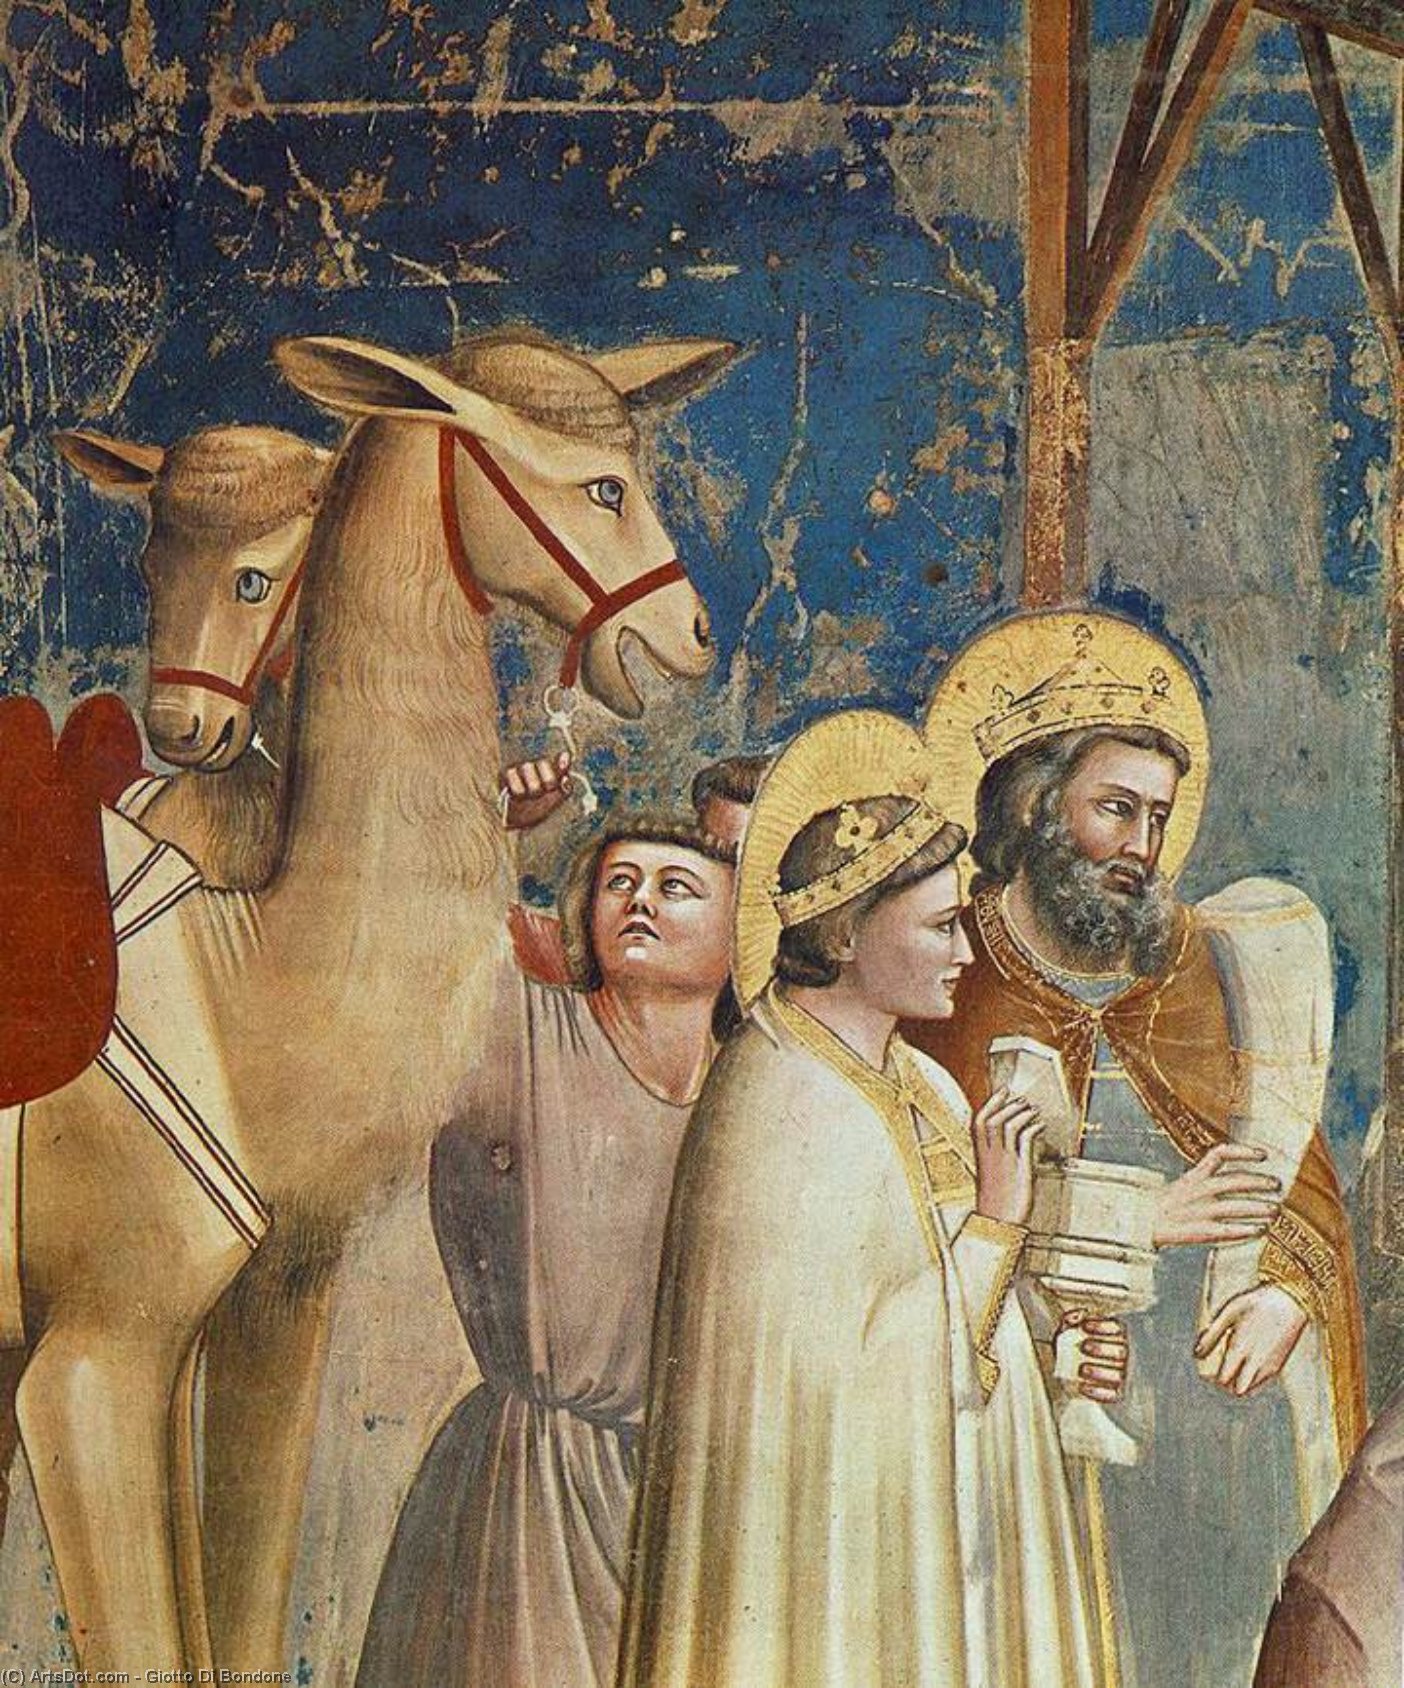 WikiOO.org - Encyclopedia of Fine Arts - Festés, Grafika Giotto Di Bondone - No. 18 Scenes from the Life of Christ: 2. Adoration of the Magi (detail)